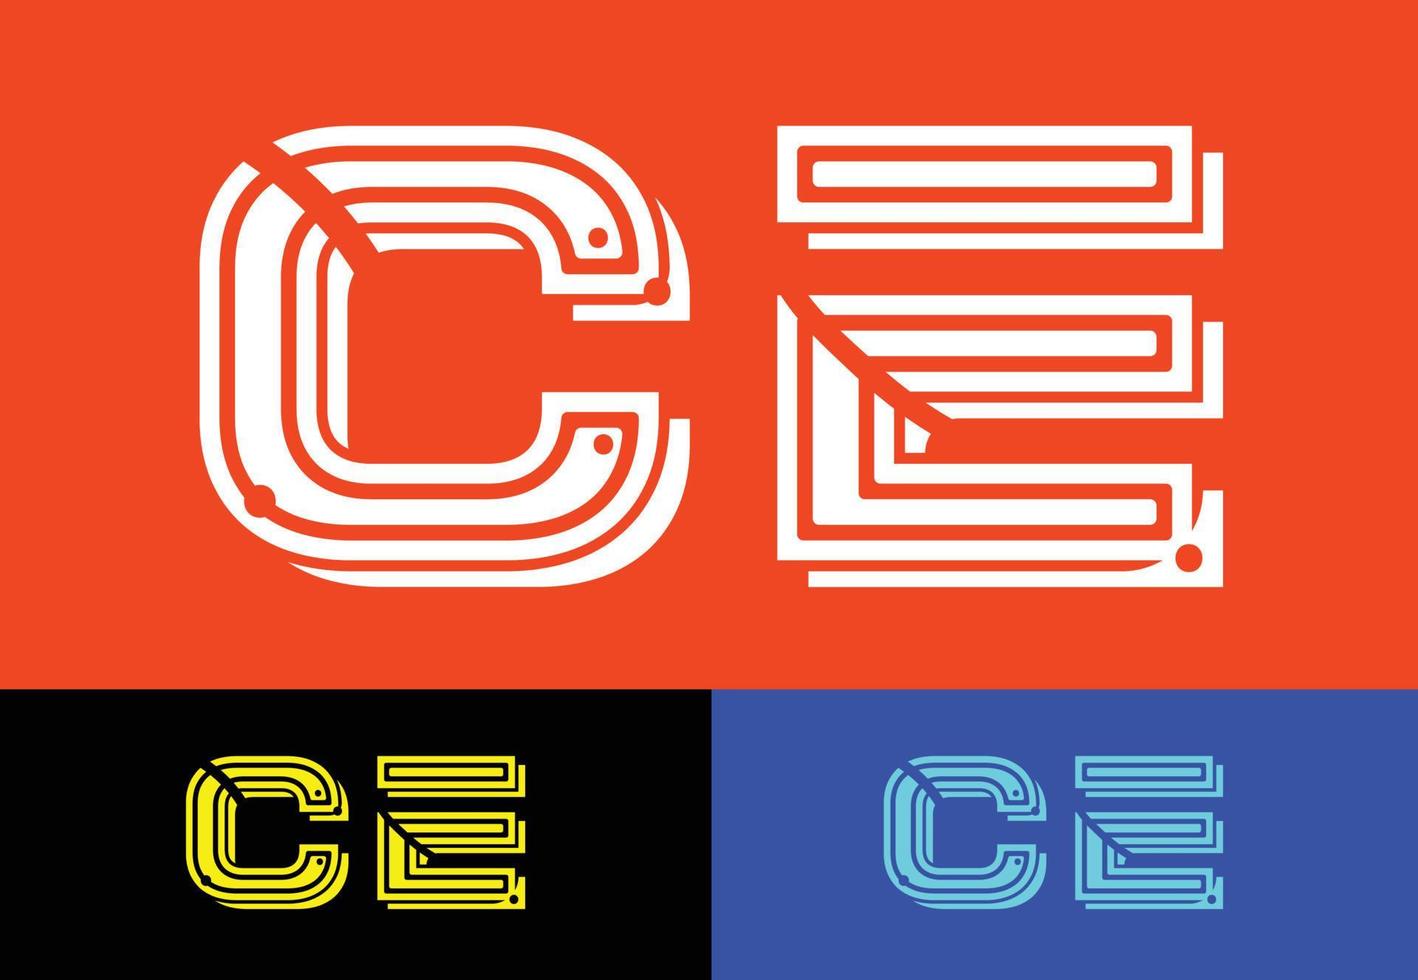 CE letter logo, t shirt and sticker design template vector